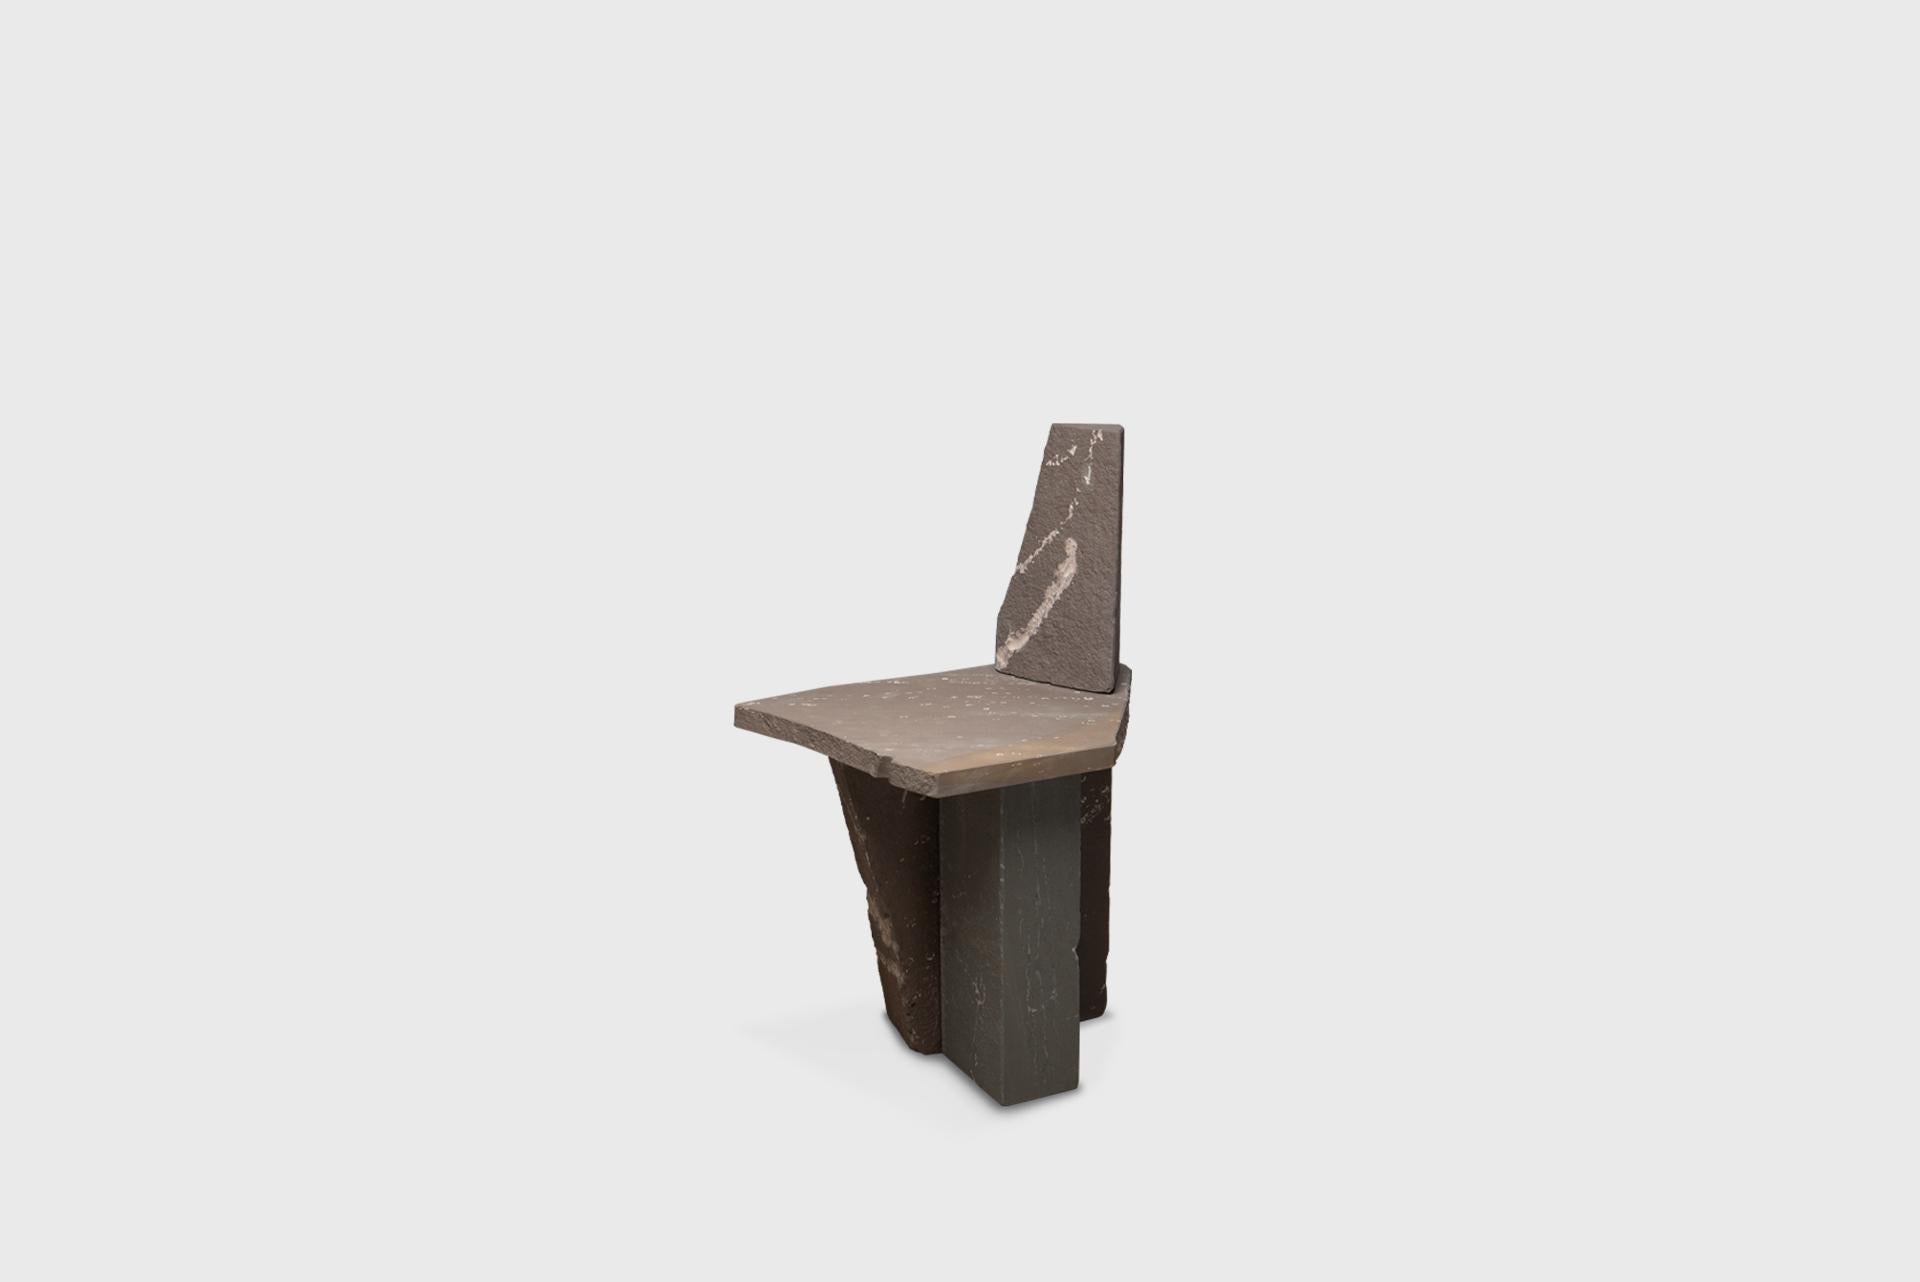 Contemporary Natural Chair 13, Graywacke Offcut Gray Stone, Carsten in der Elst For Sale 4